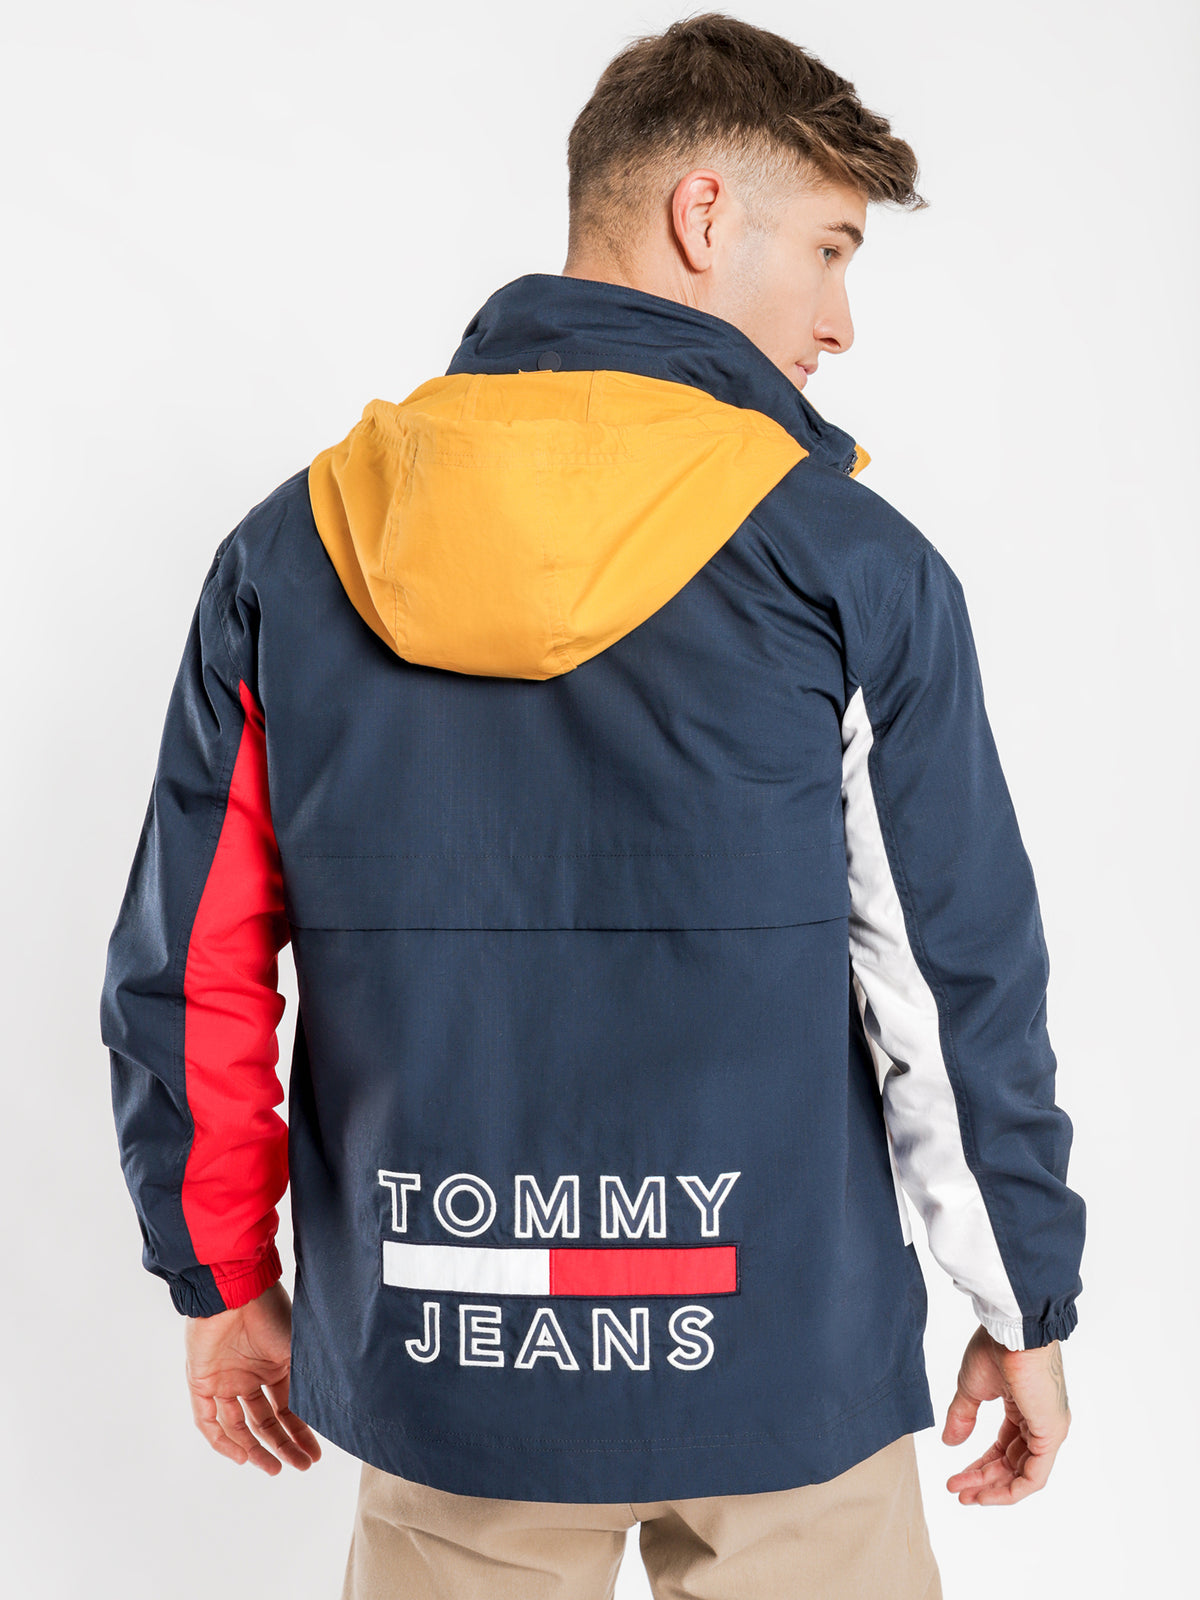 TJ US Reversible Hooded Jacket in Navy &amp; Yellow